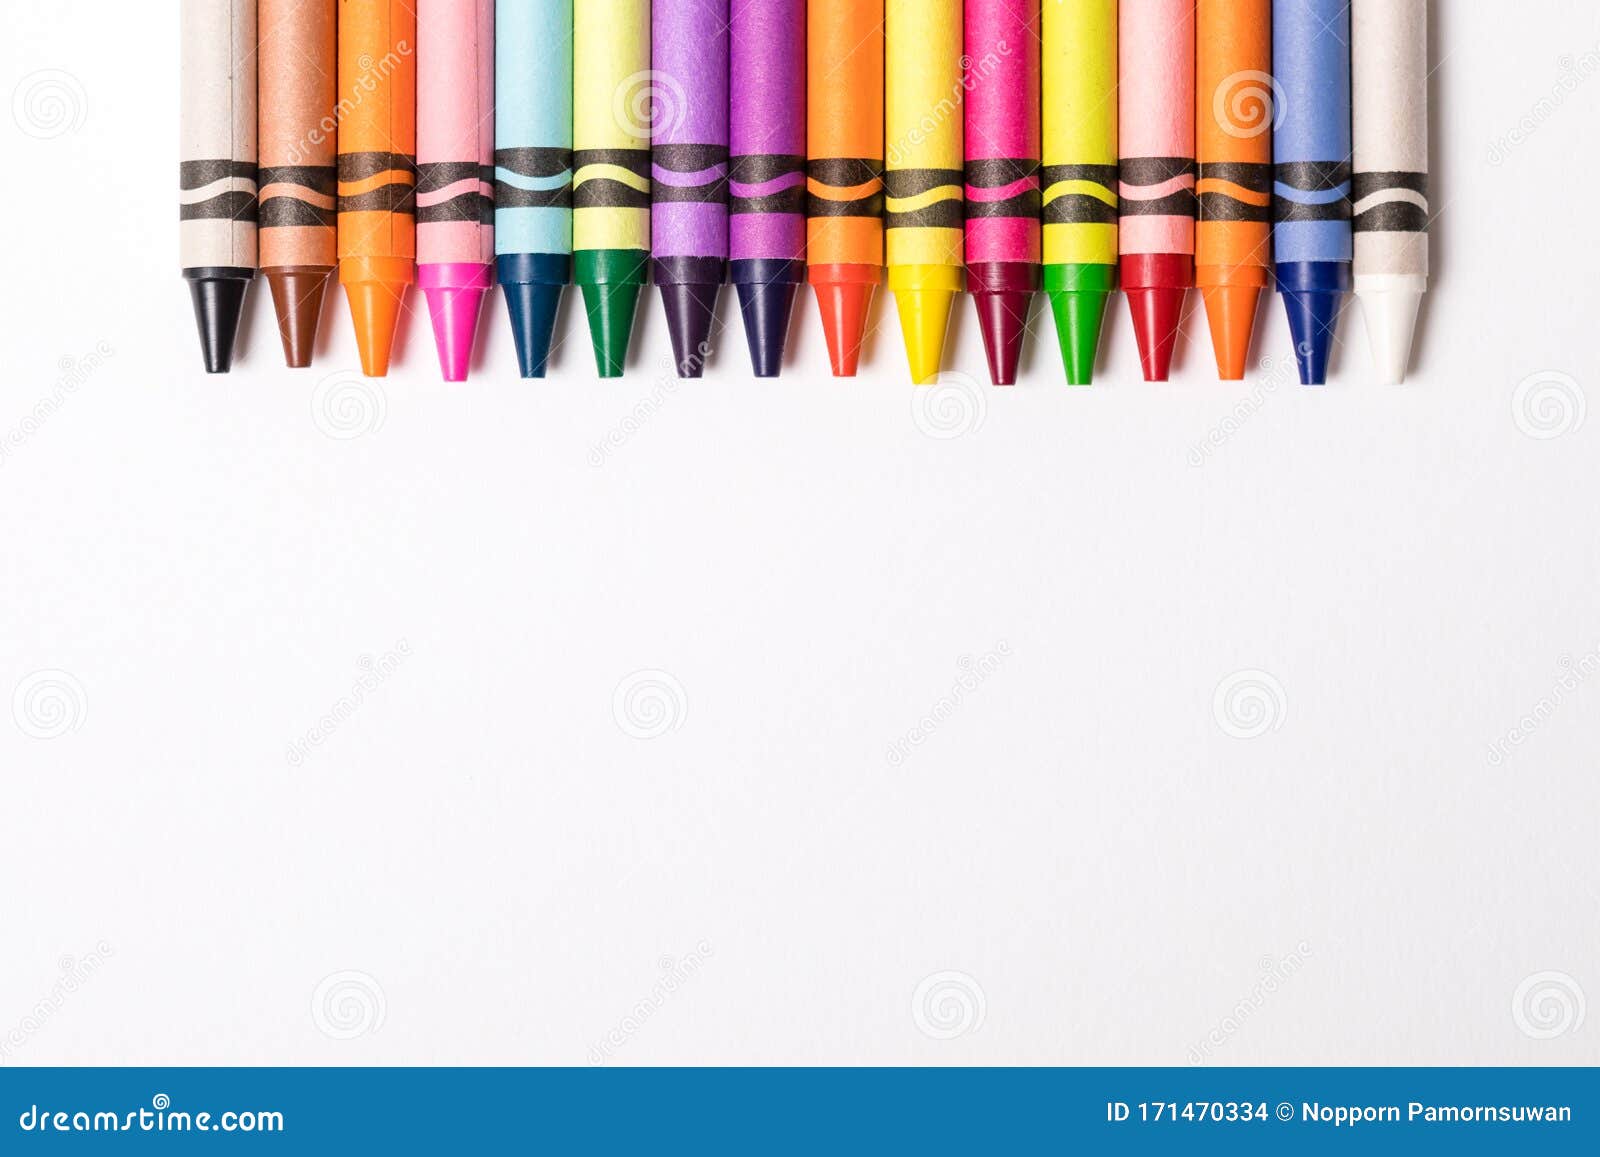 Close up picture of many colored pencil crayons on white